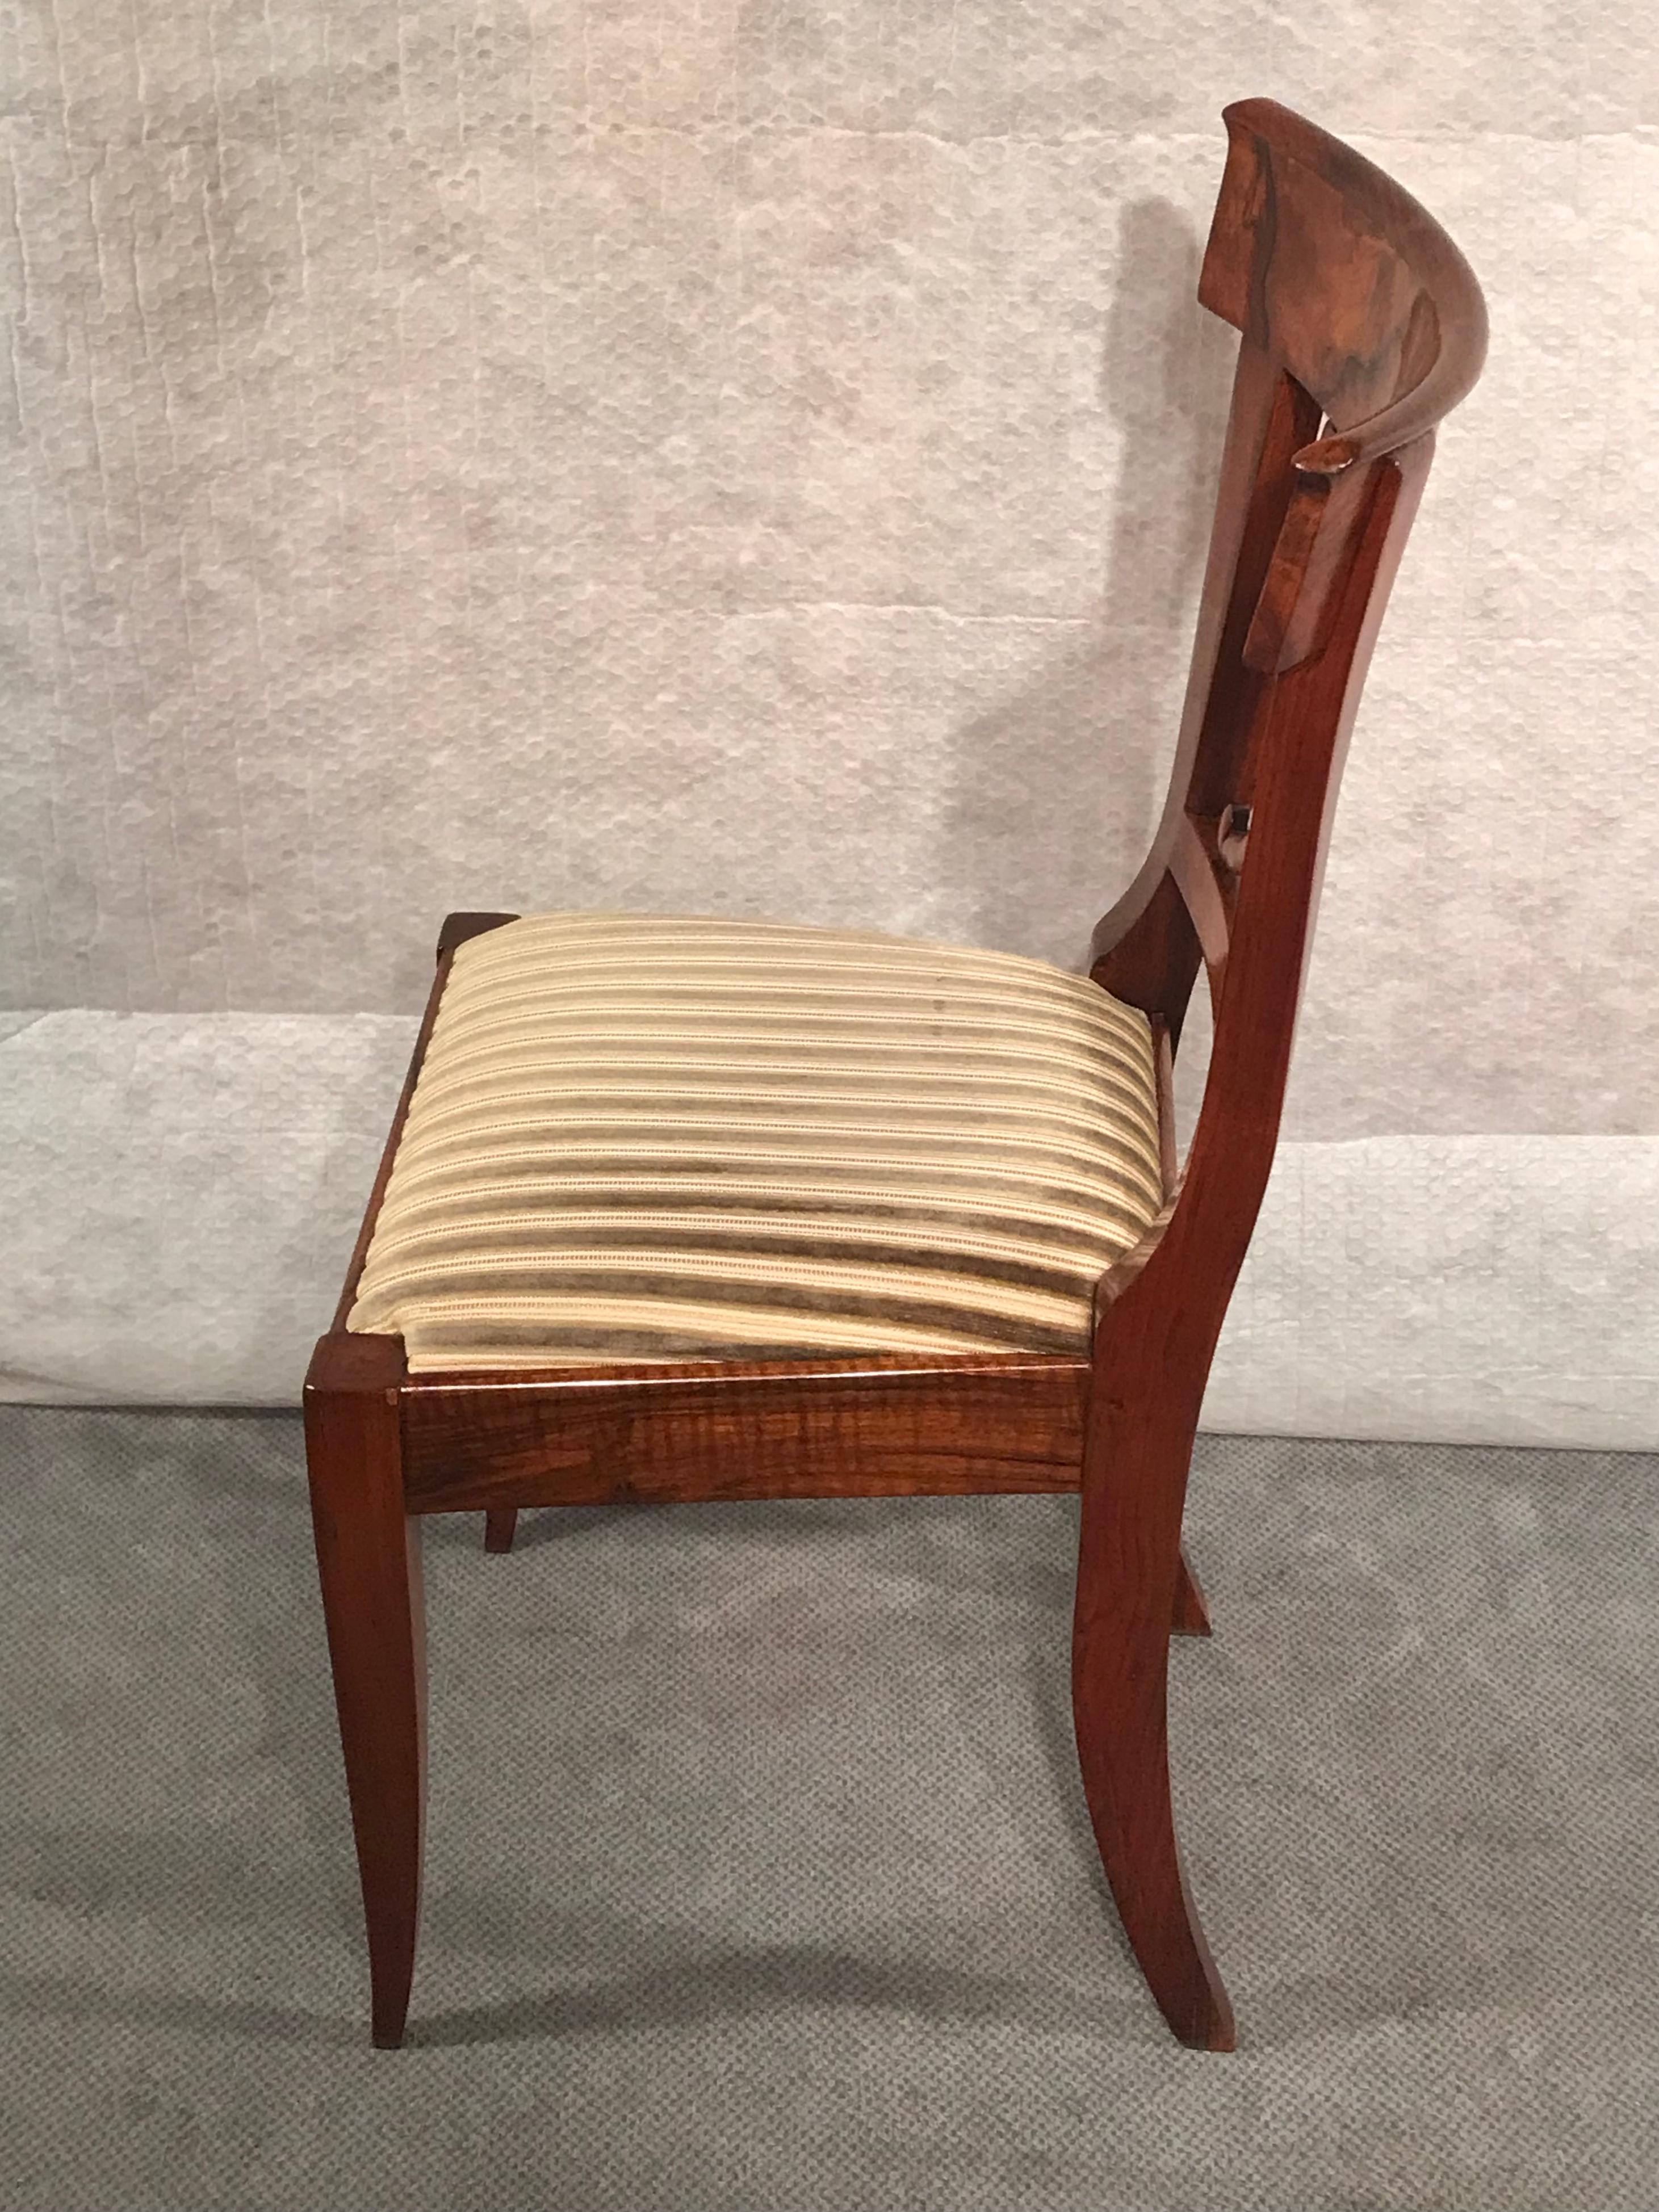 Set of 4 Biedermeier Dining Chairs, South German 1820 In Good Condition For Sale In Belmont, MA